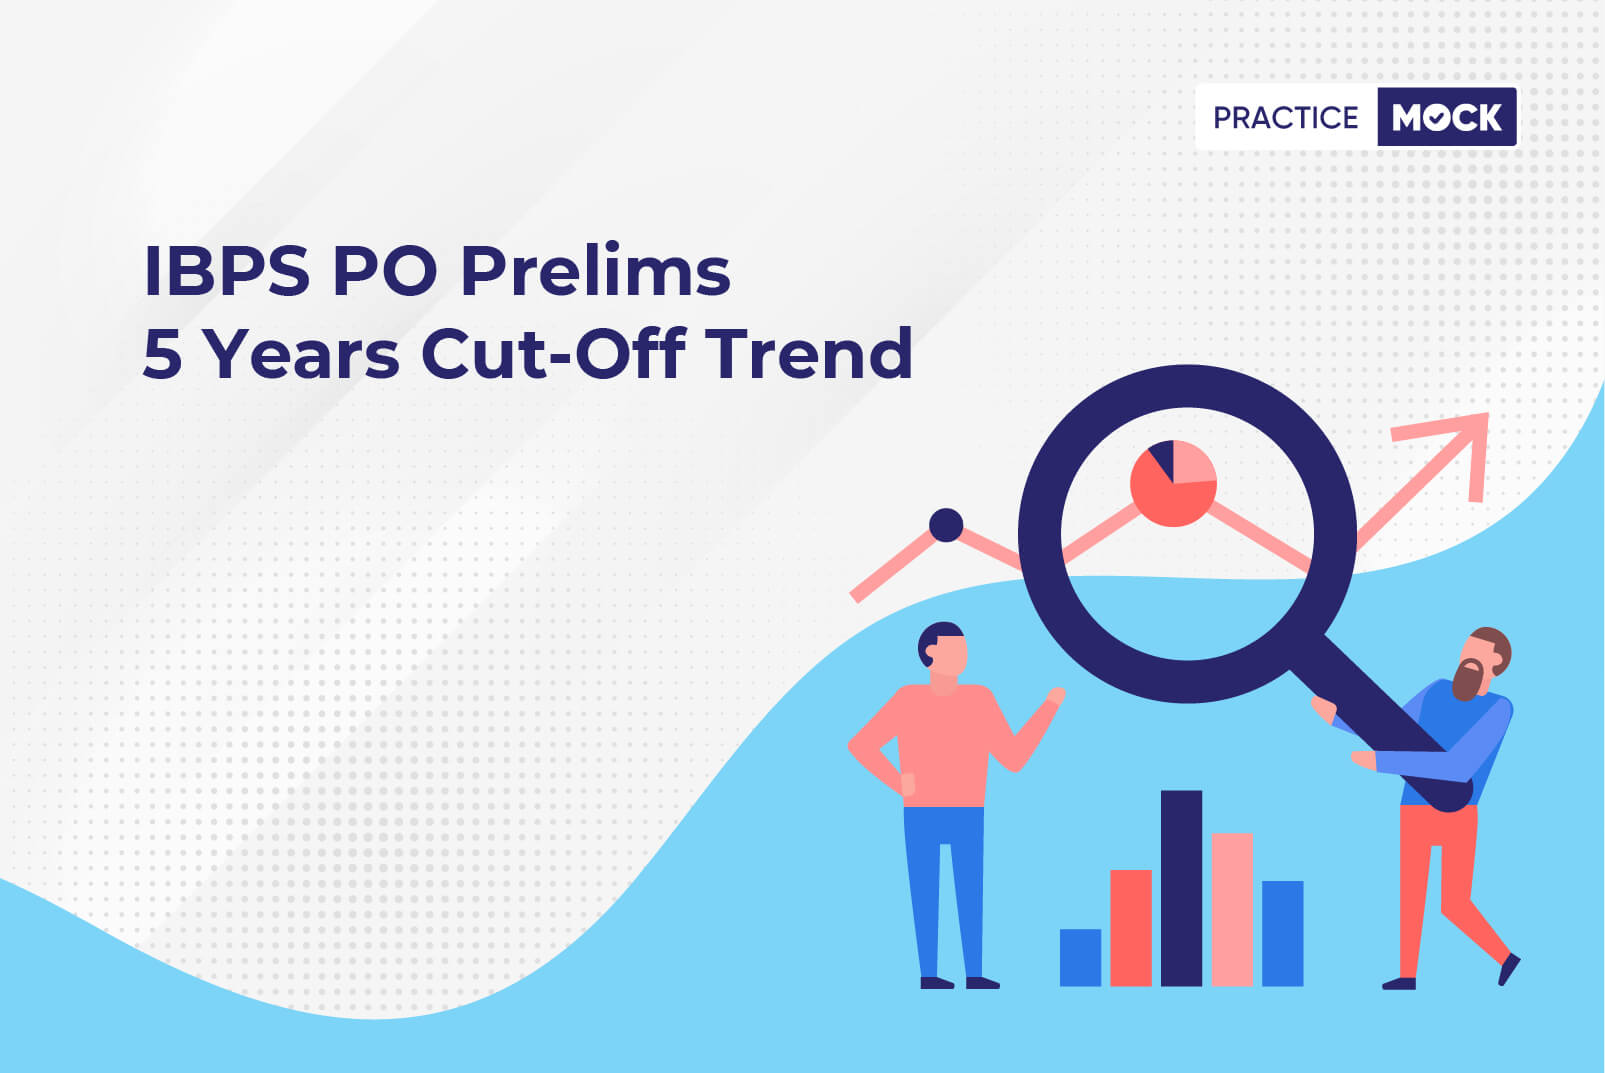 IBPS PO Prelims 5 Years Cut-Off Trend